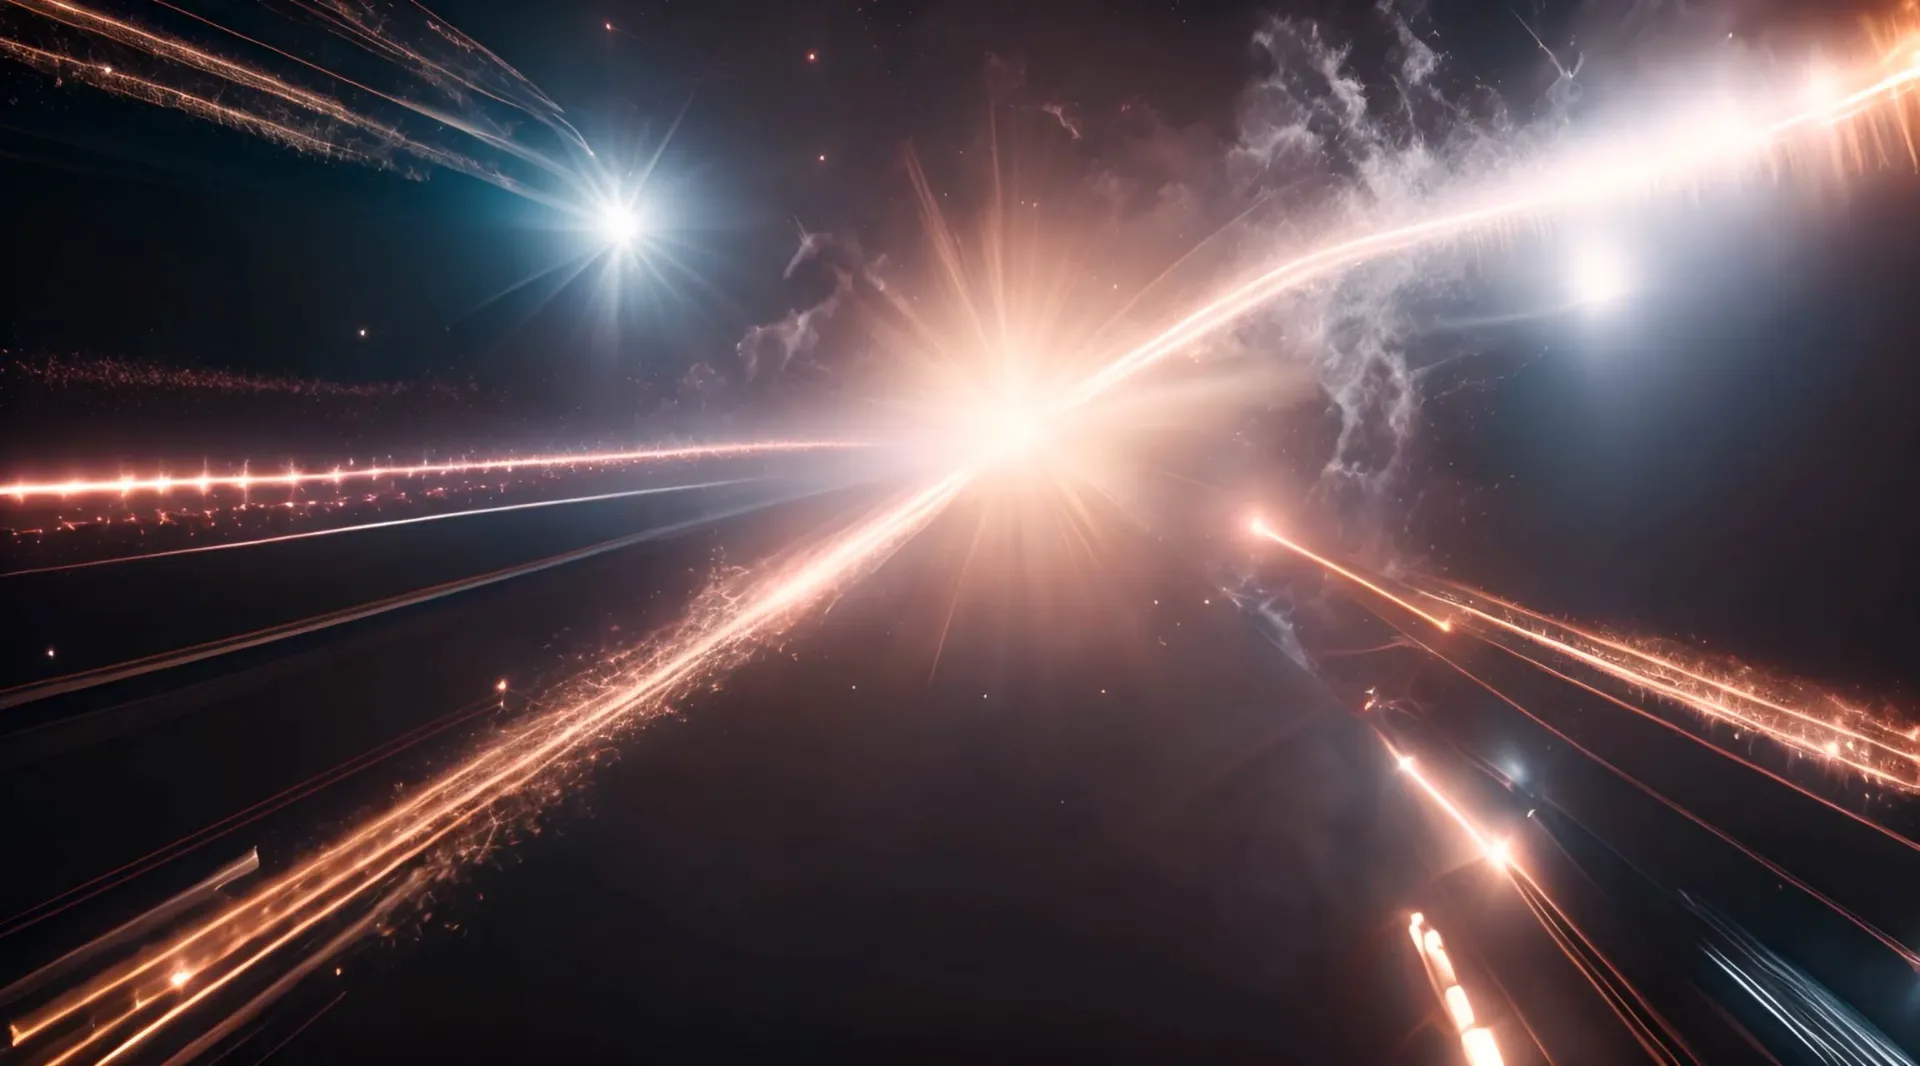 Galactic Core Eruption in Spectacular Light Motion Graphic